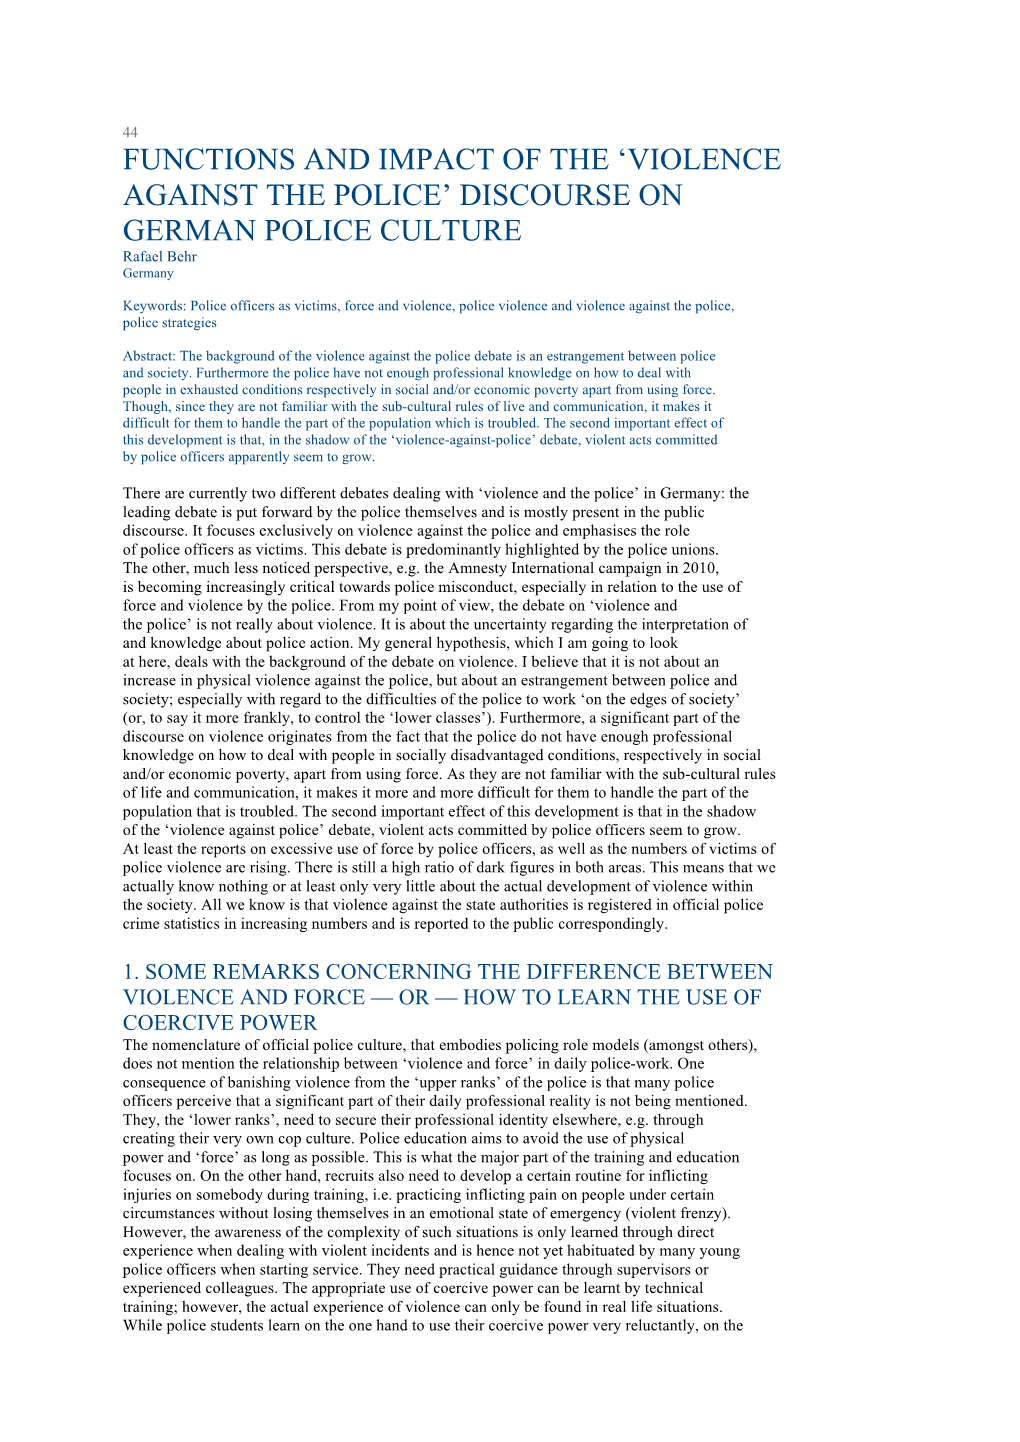 Functions and Impact of the 'Violence Against the Police' Discourse on German Police Culture